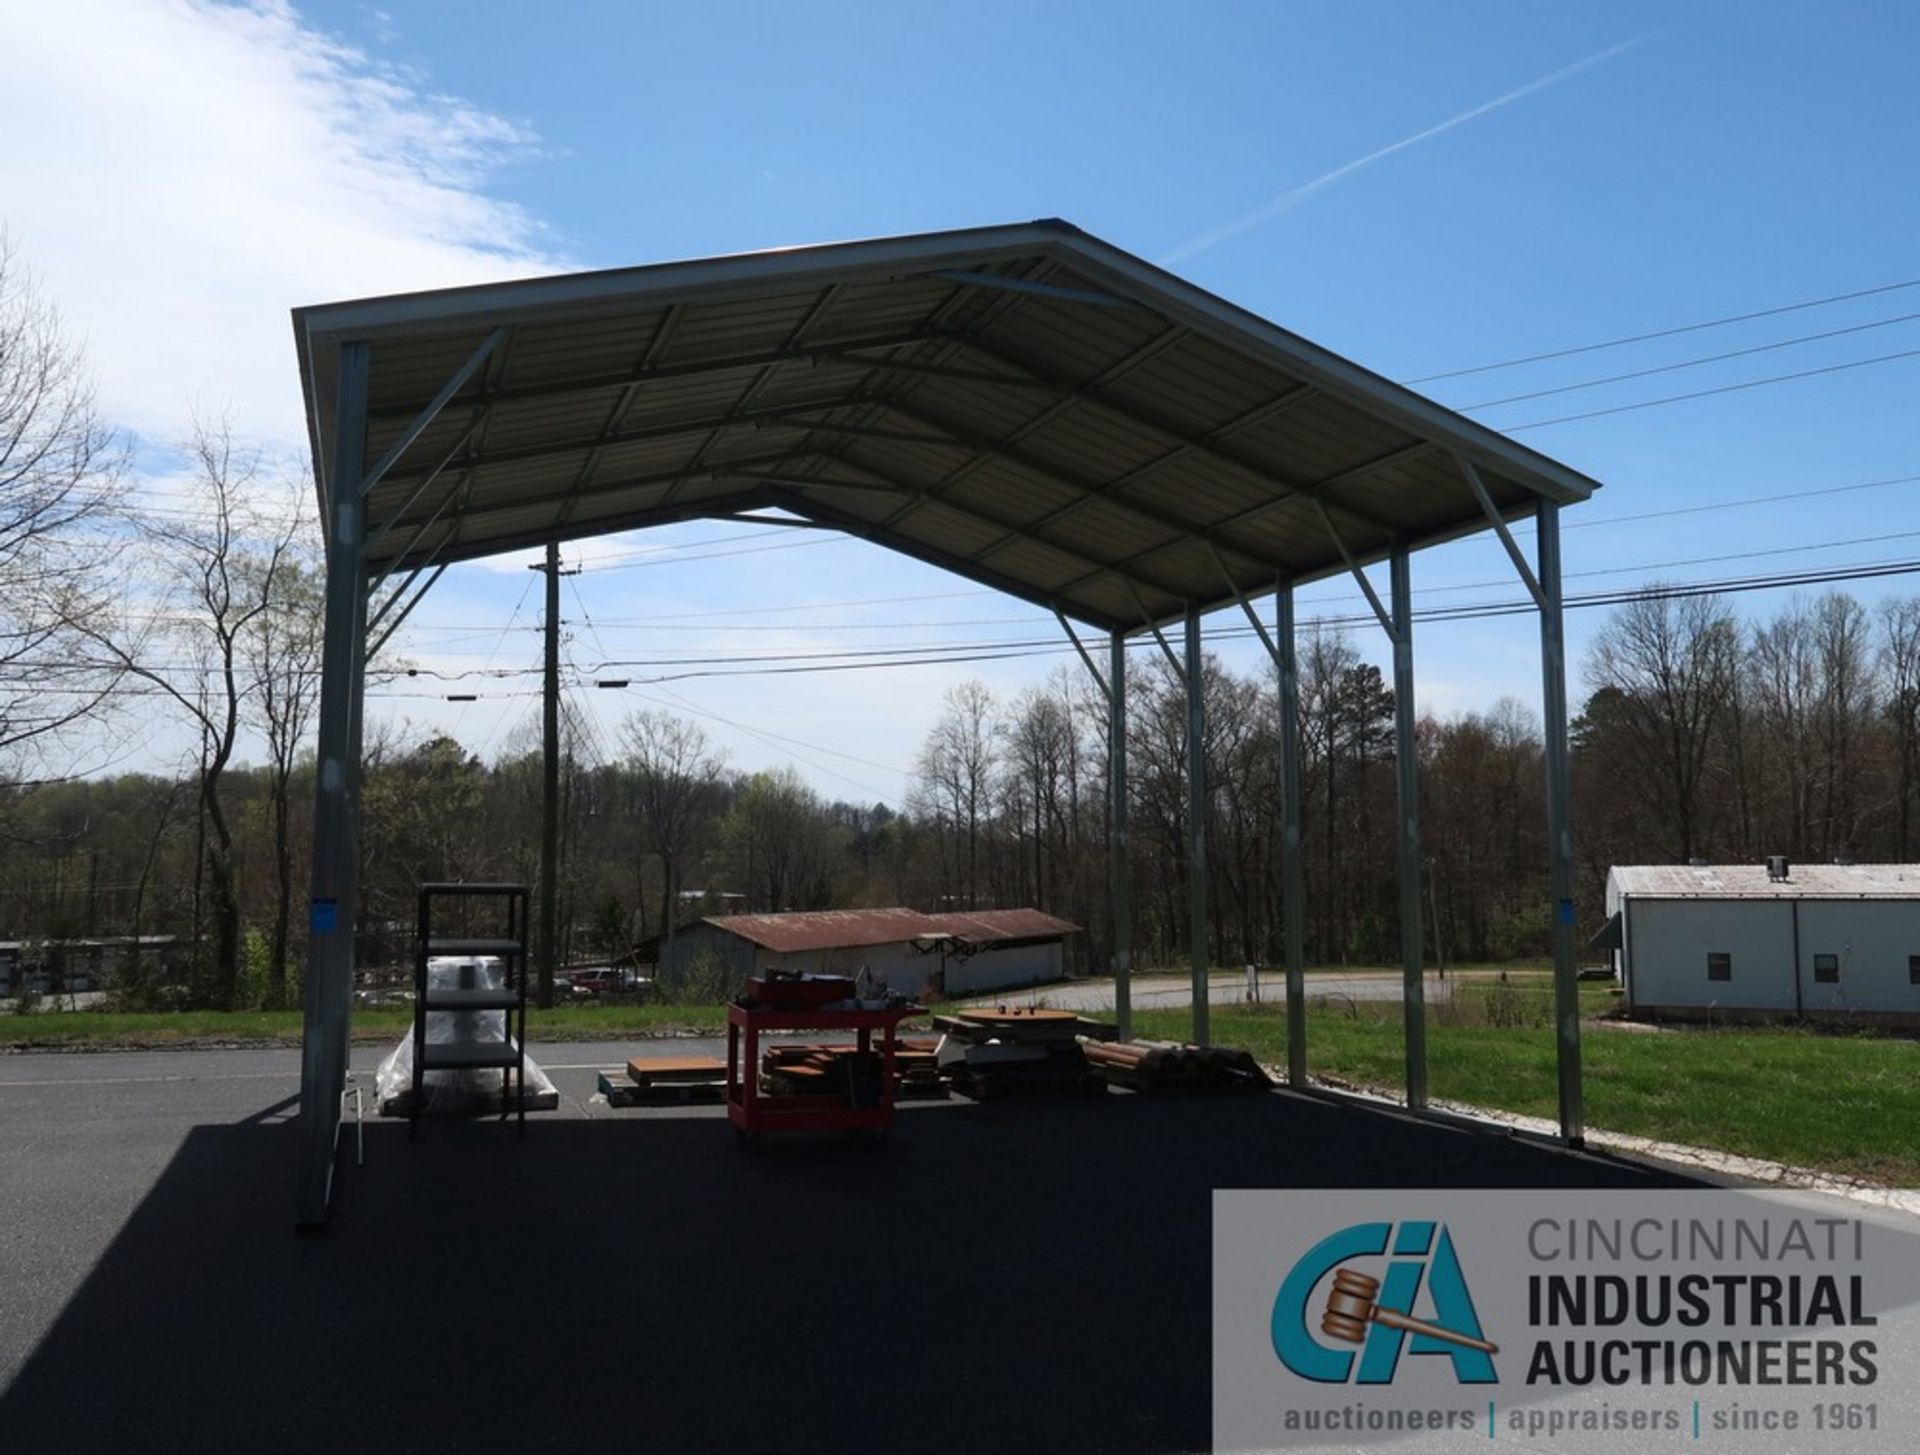 20' DEEP X 24' WIDE X 20' HIGH AT PEAK (APPROX.) GABLE ROOF OPEN AIR CARPORT